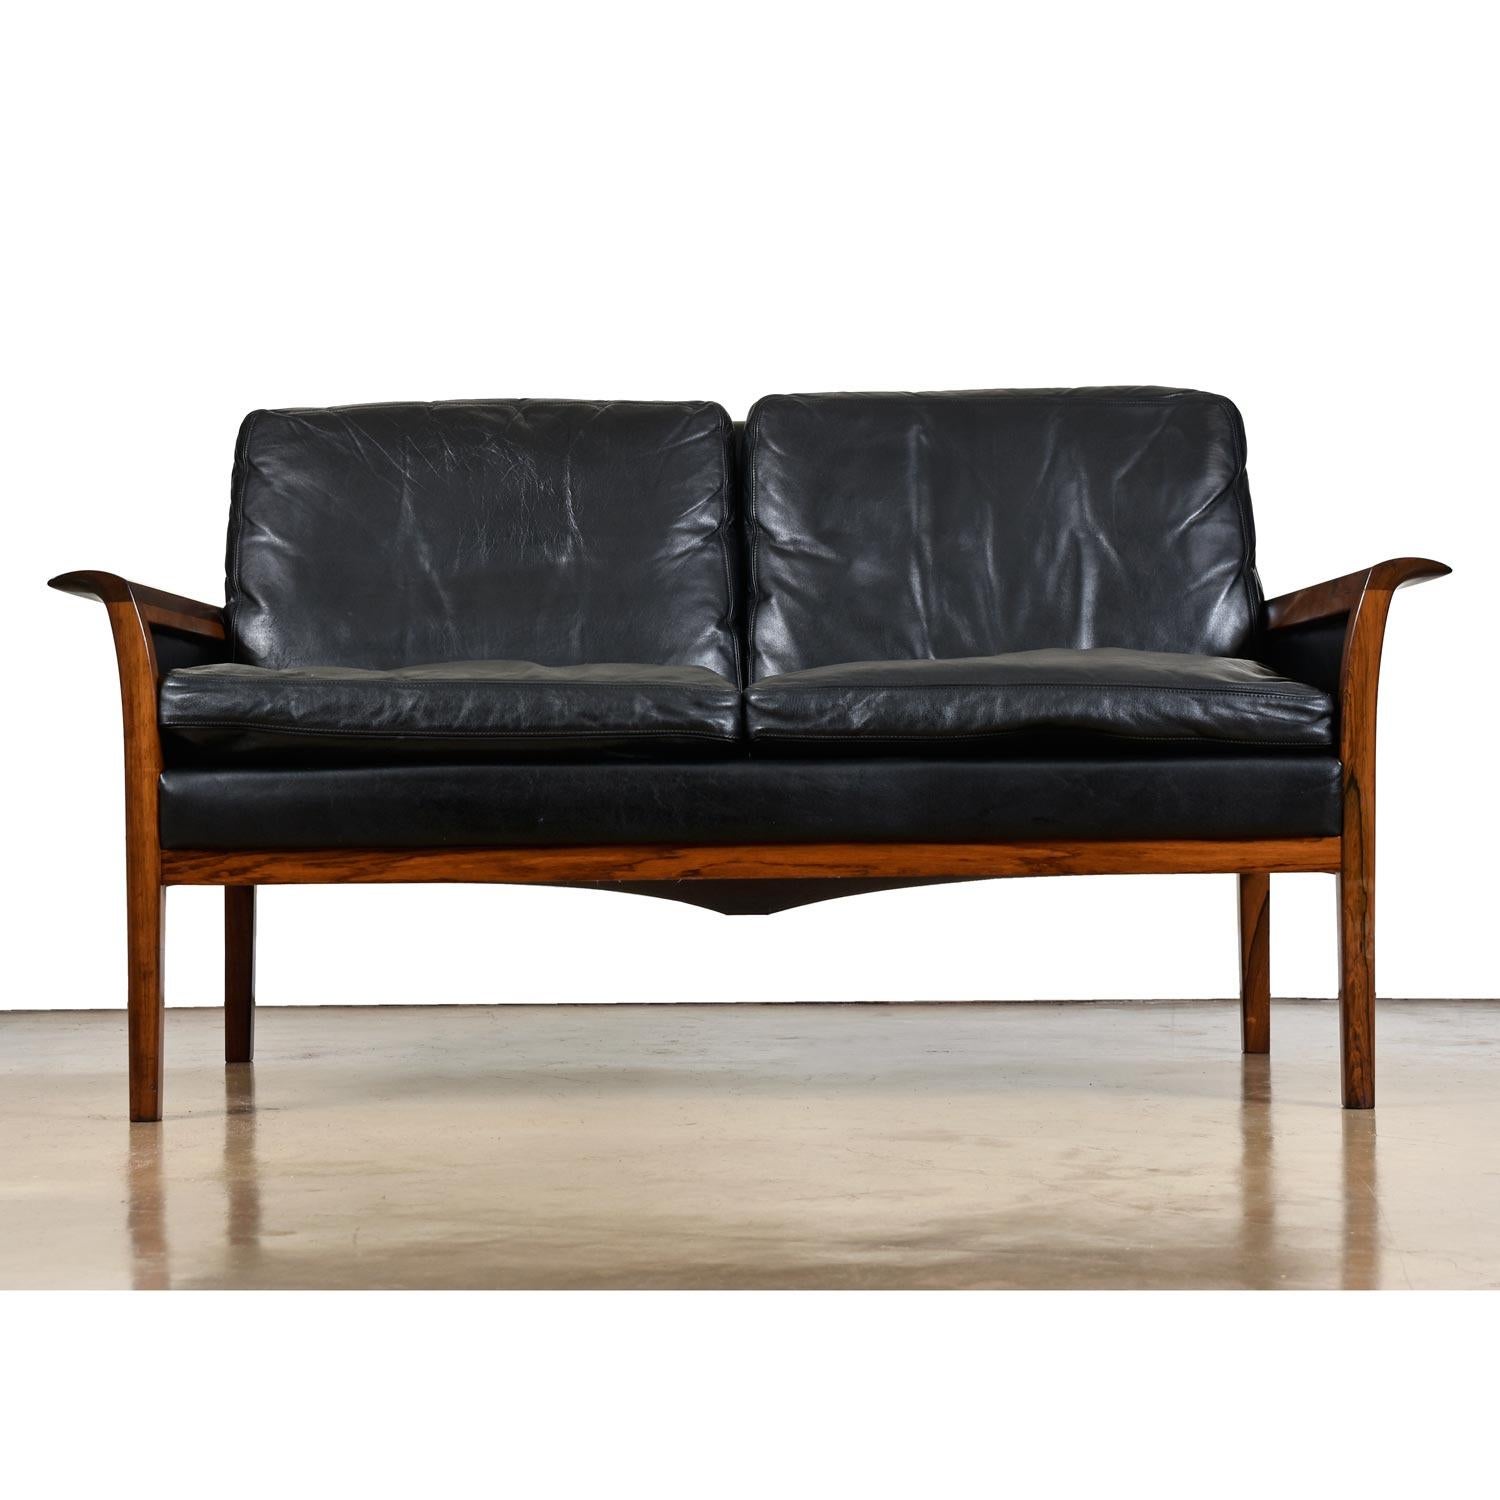 Two-seat loveseat sofa designed by Knut Saeter for Vatne Mobler. Solid rosewood frame with sculpted scroll armrests and original black leather. The Furnish Me VIntage team has not only restored this iconic sofa to excellent condition, but we